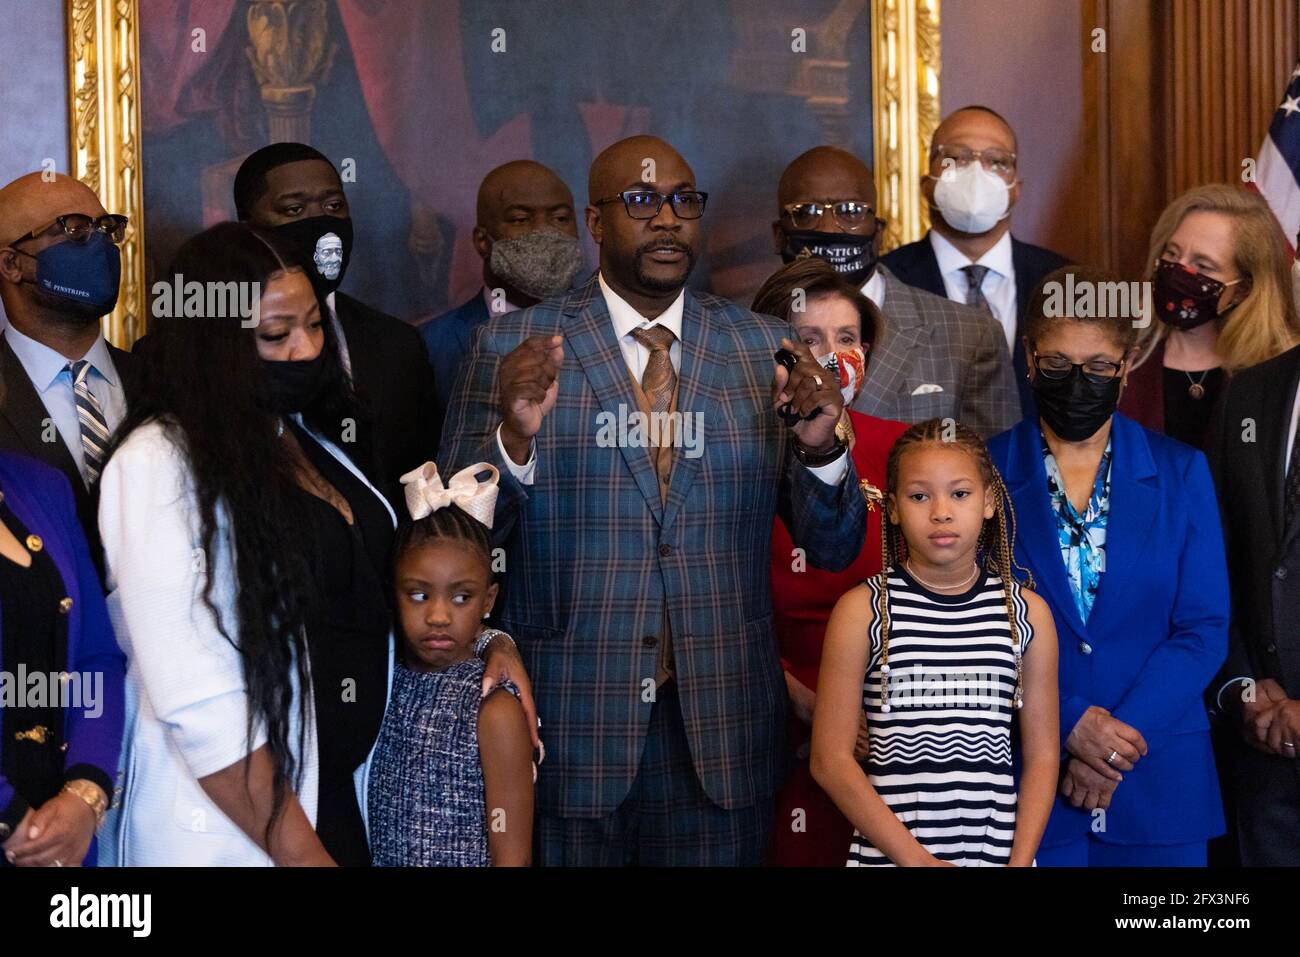 Philonise floyd, brother of George Floyd, speaks to the press while  standing with House Speaker Nancy Pelosi, Dp-CA, other members of the Floyd family  prior to a meeting to mark the anniversary